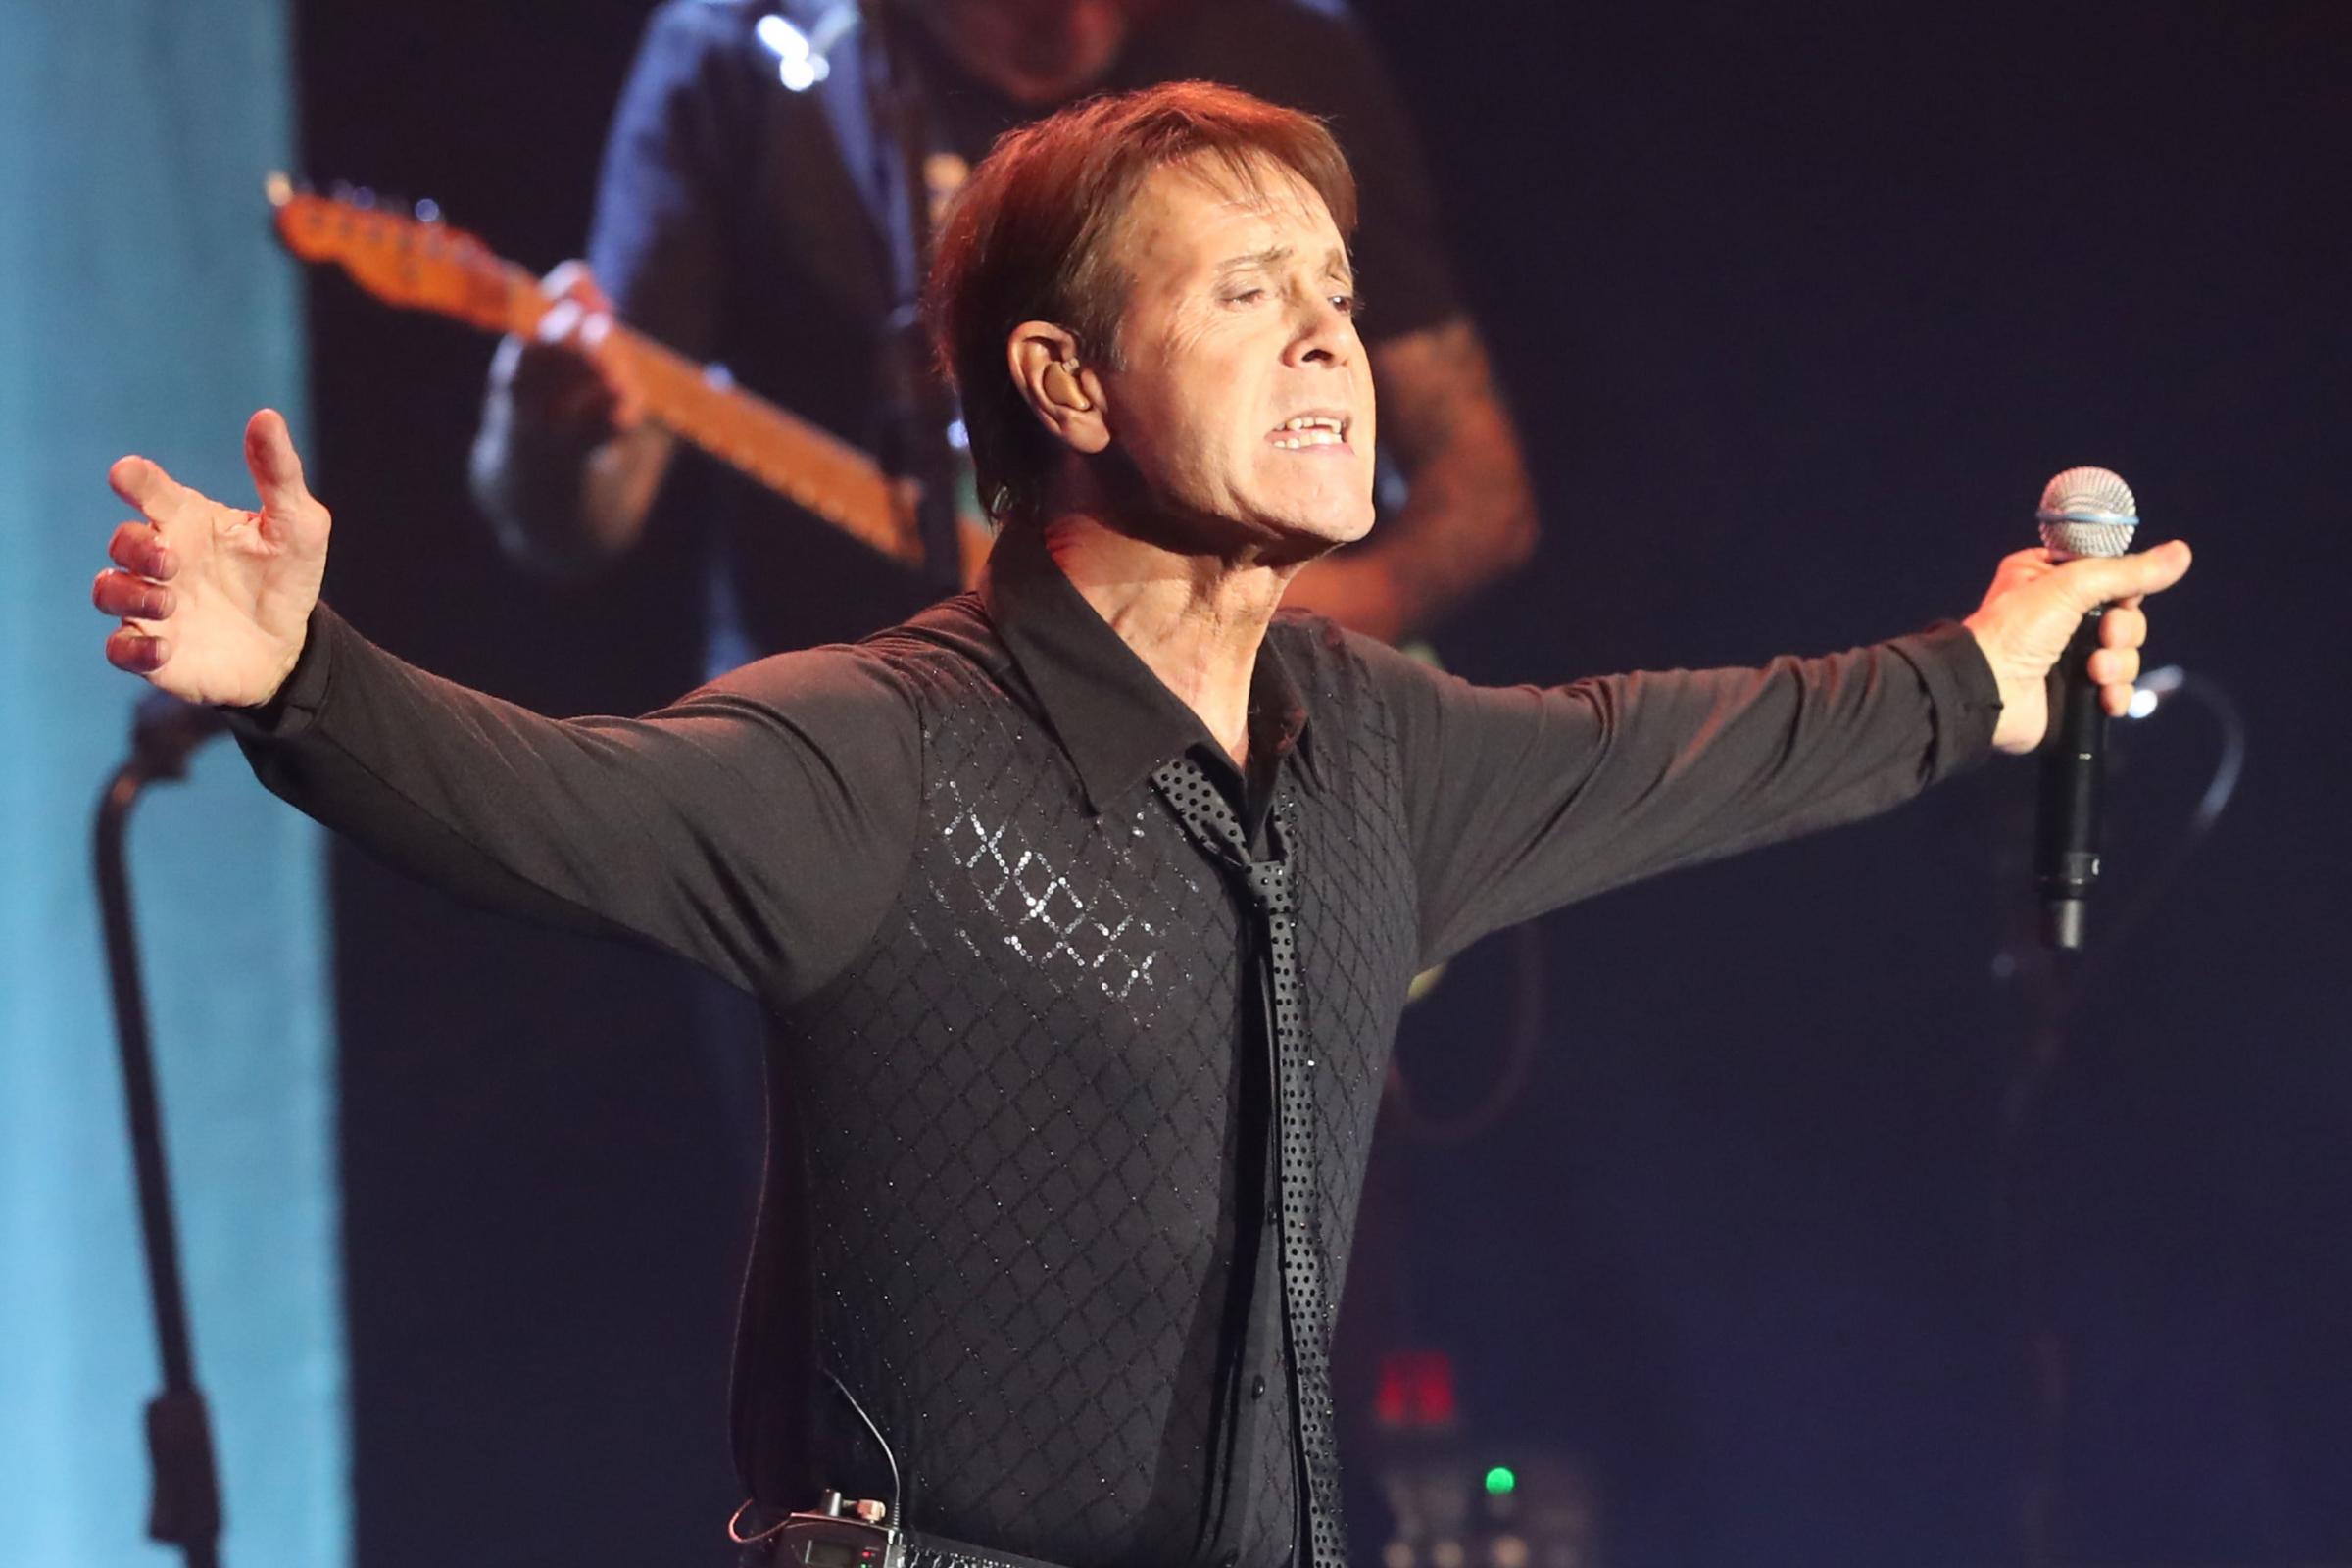 Sir Cliff Richard speaks of Christianity’s profound effect on his life